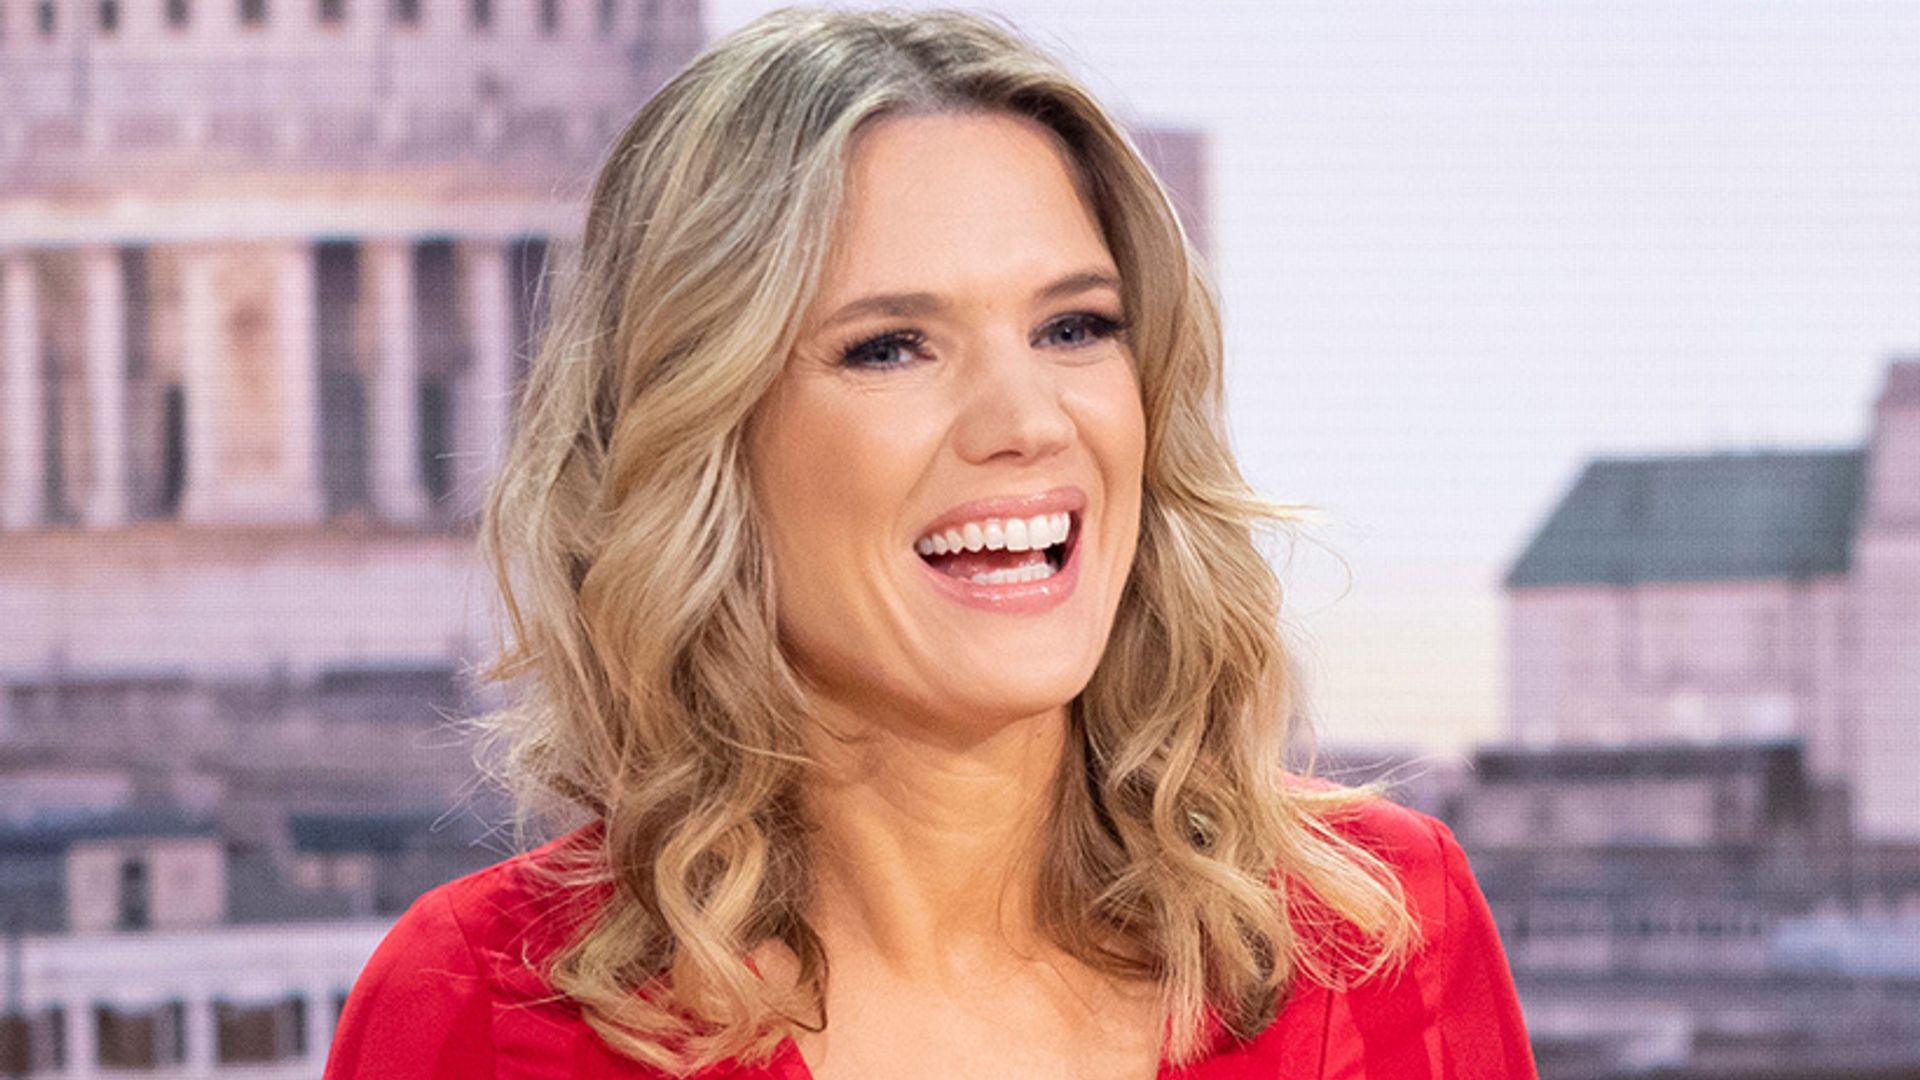 Charlotte Hawkins' red lace dress has wedding guest dressing written all over it